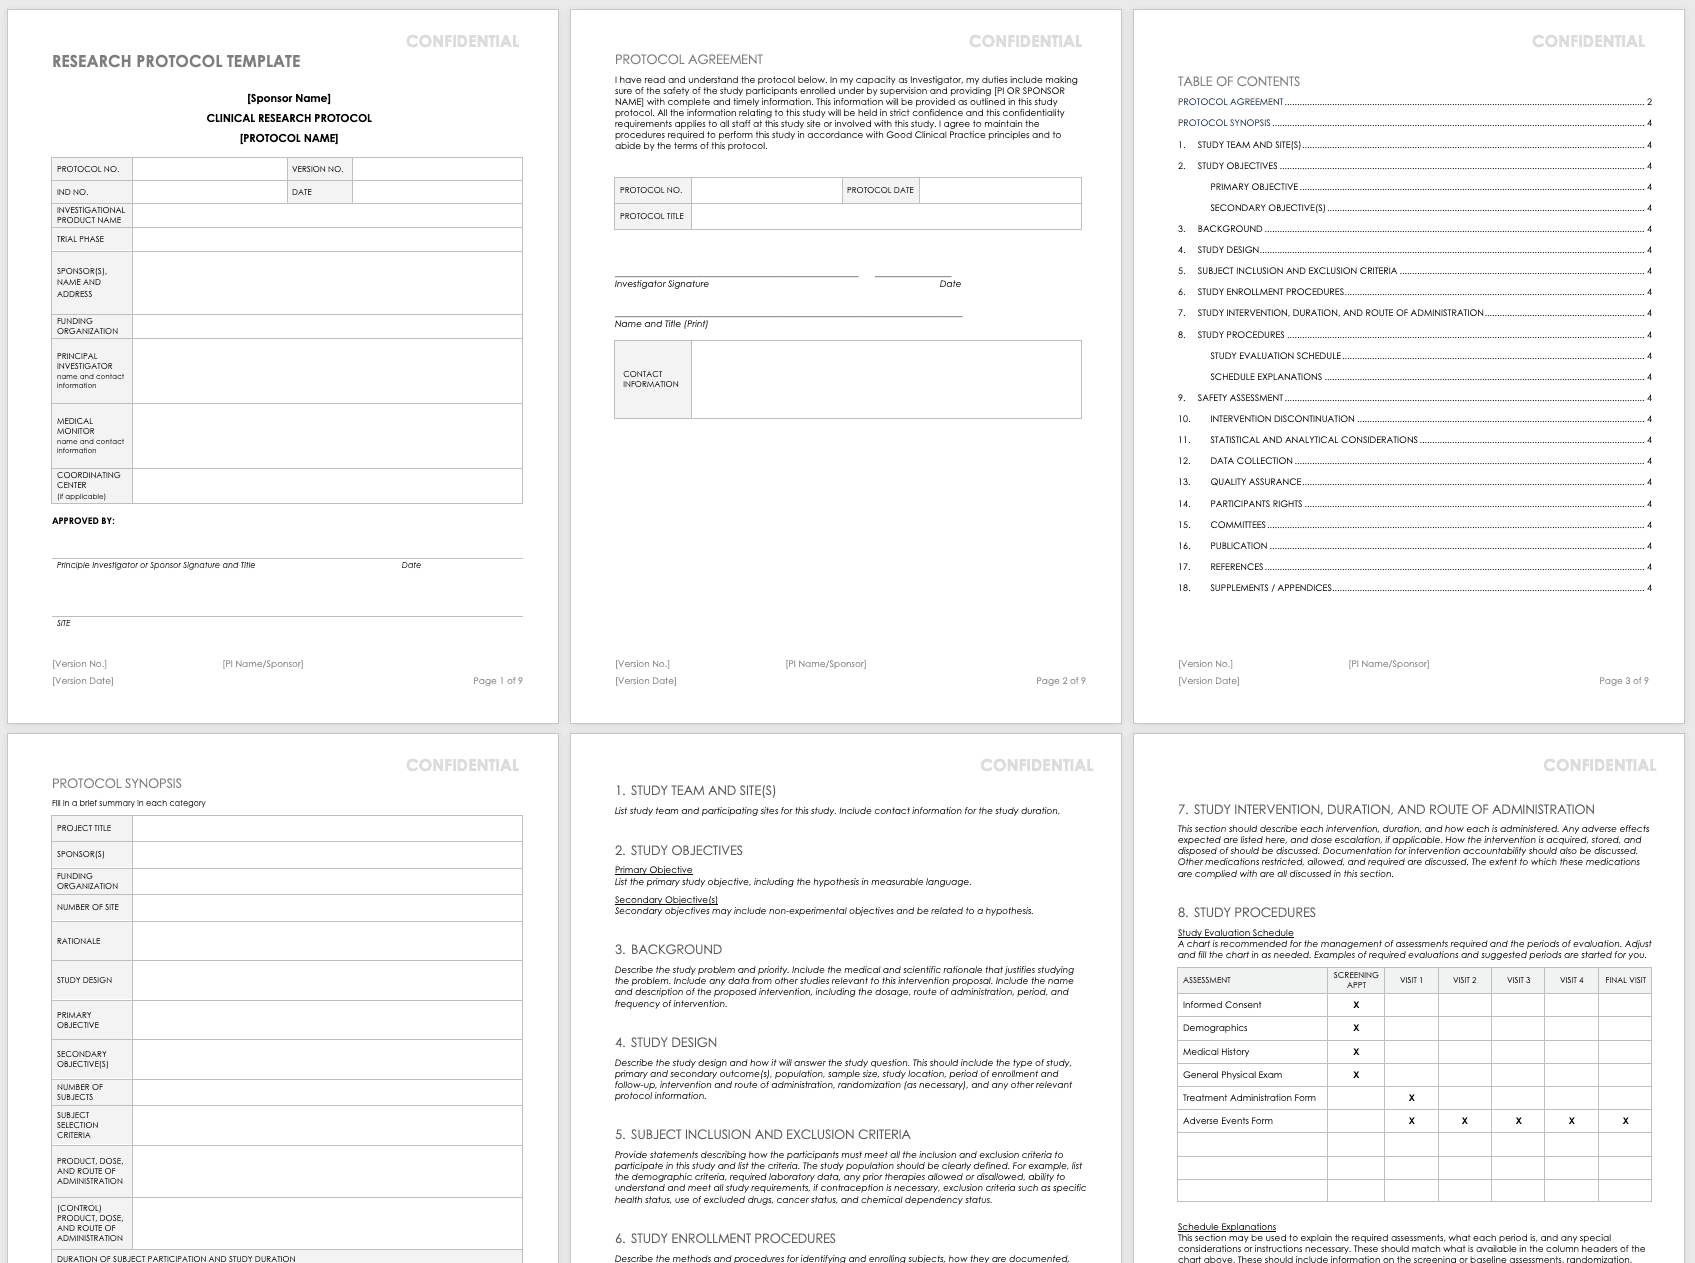 Free Clinical Trial Templates | Smartsheet Throughout Clinical Trial Report Template